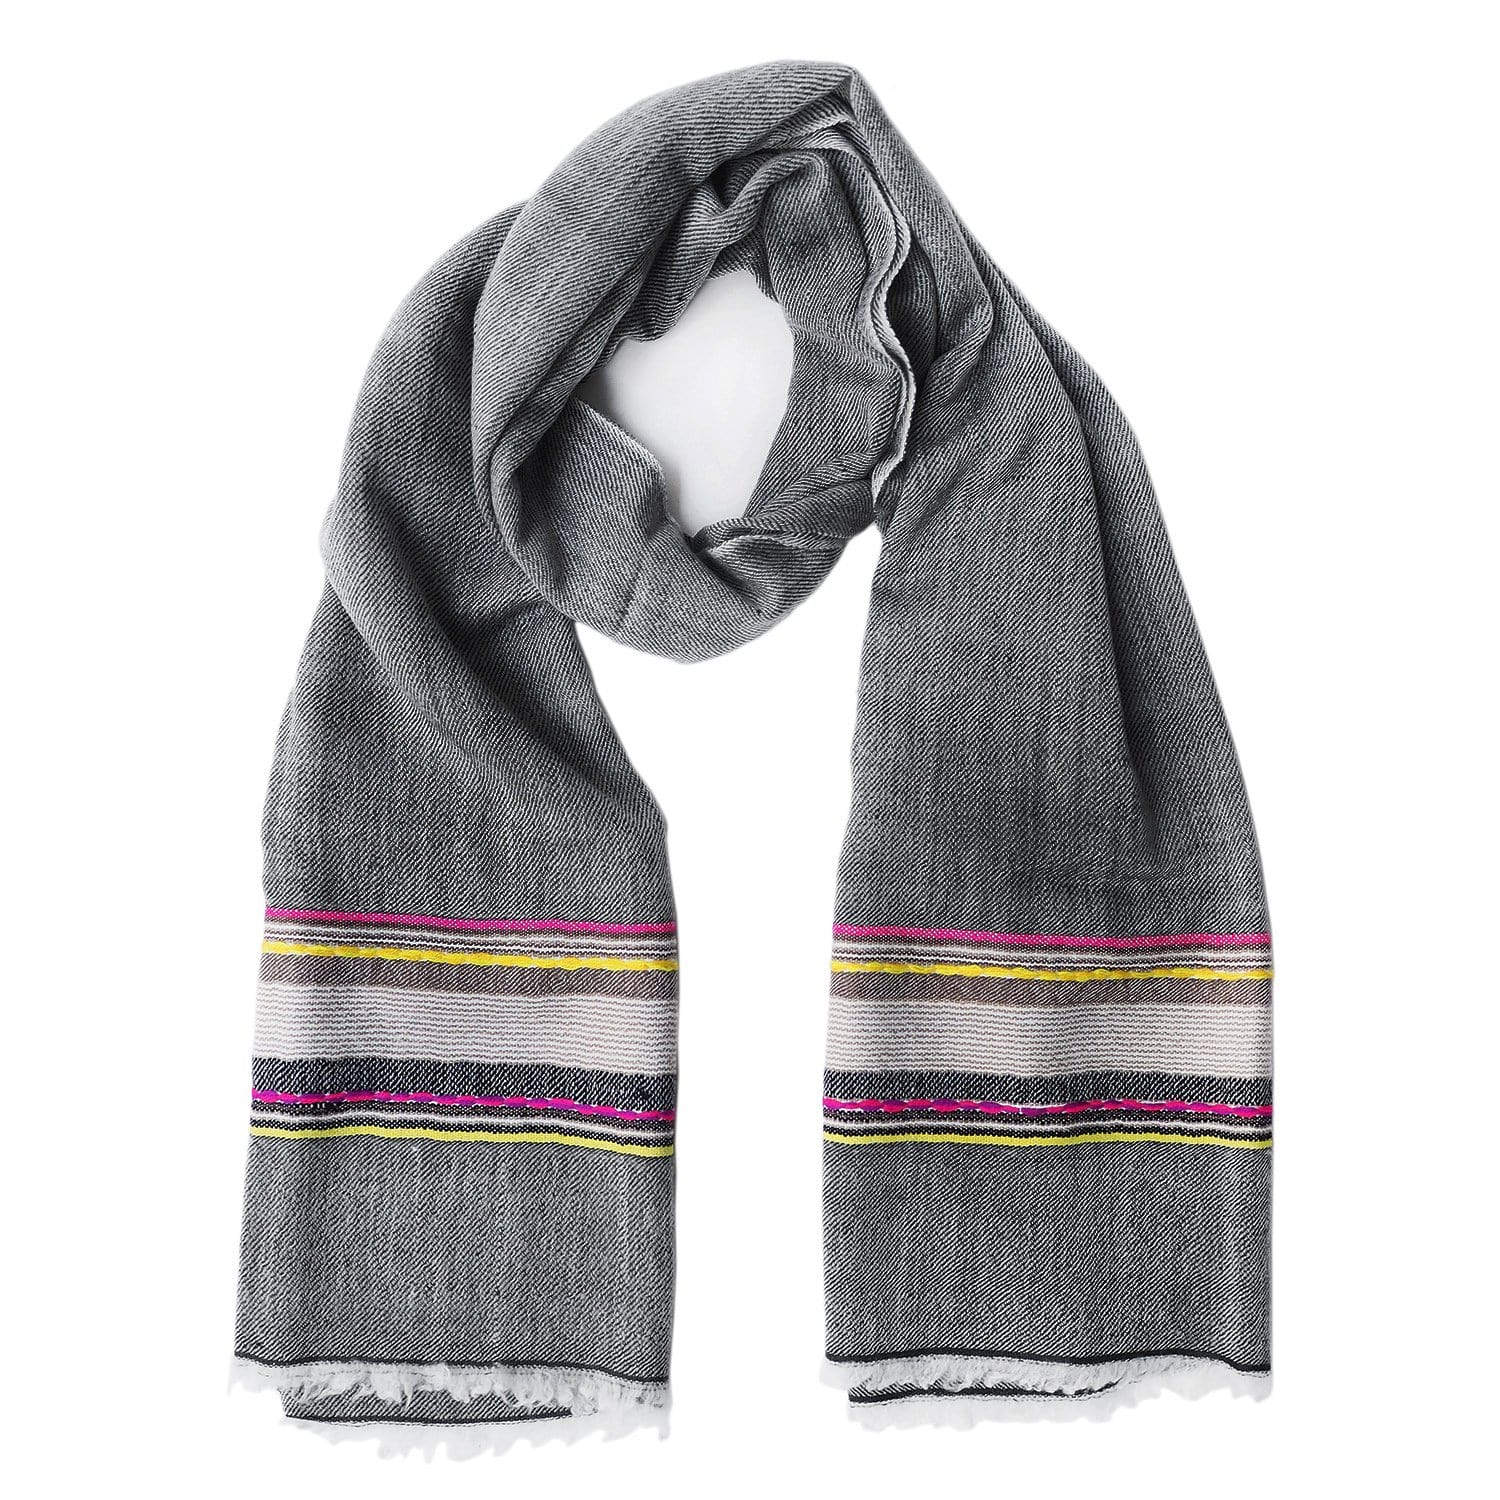 Black with a touch of colour, this pashmina comes from the Himalayan region of India.  Made out of the finest Ibex wool, it will keep you warm and add some colour to your dreary winter outfit. 